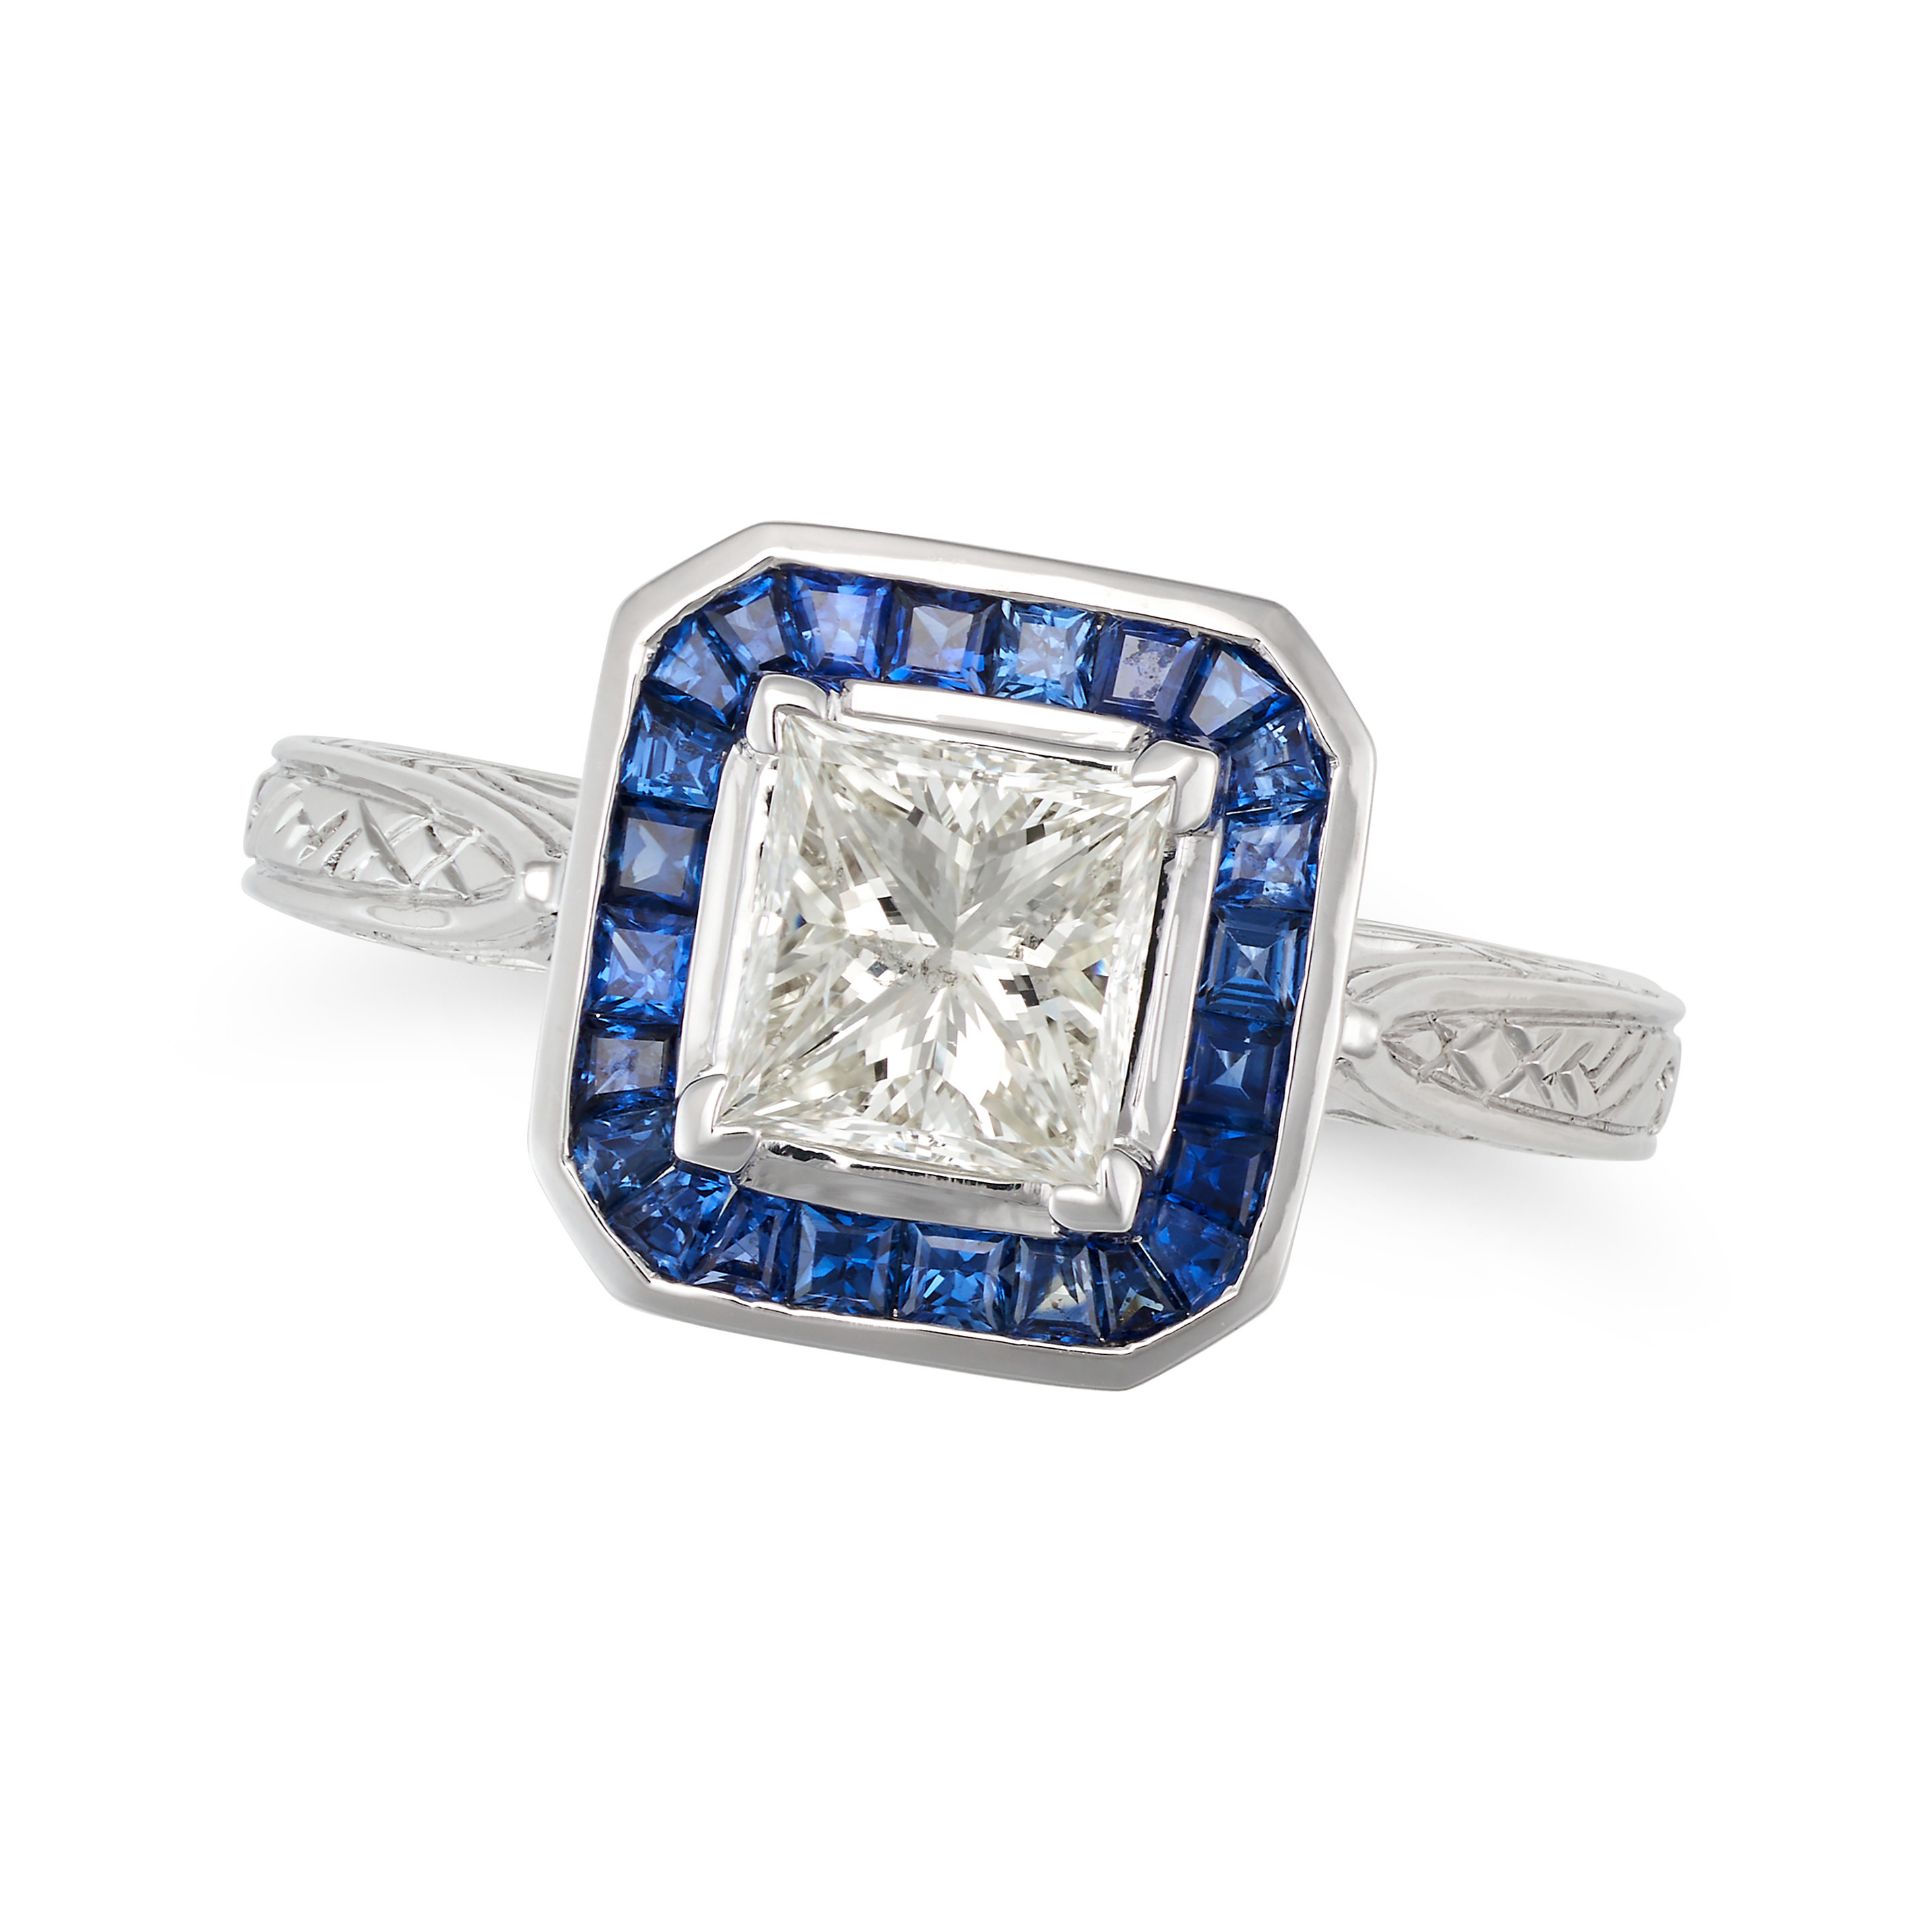 A DIAMOND AND SAPPHIRE DRESS RING in 14ct white gold, set with a princess cut diamond of approxim...